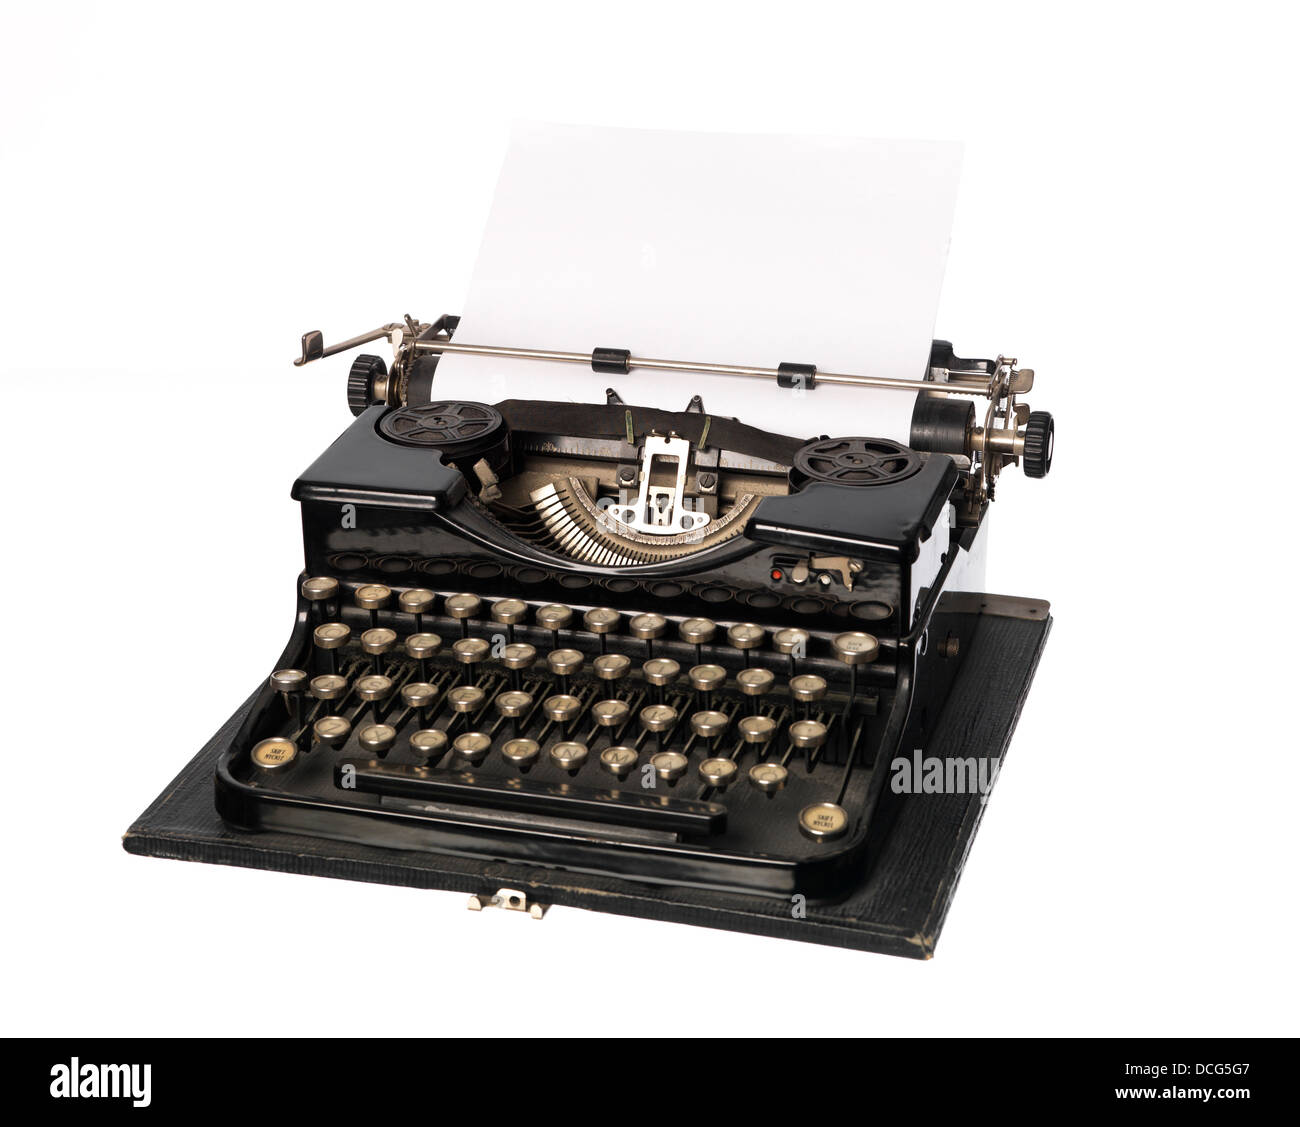 Vintage Portable Typewriter with Paper Stock Photo - Image of machine,  message: 16965118